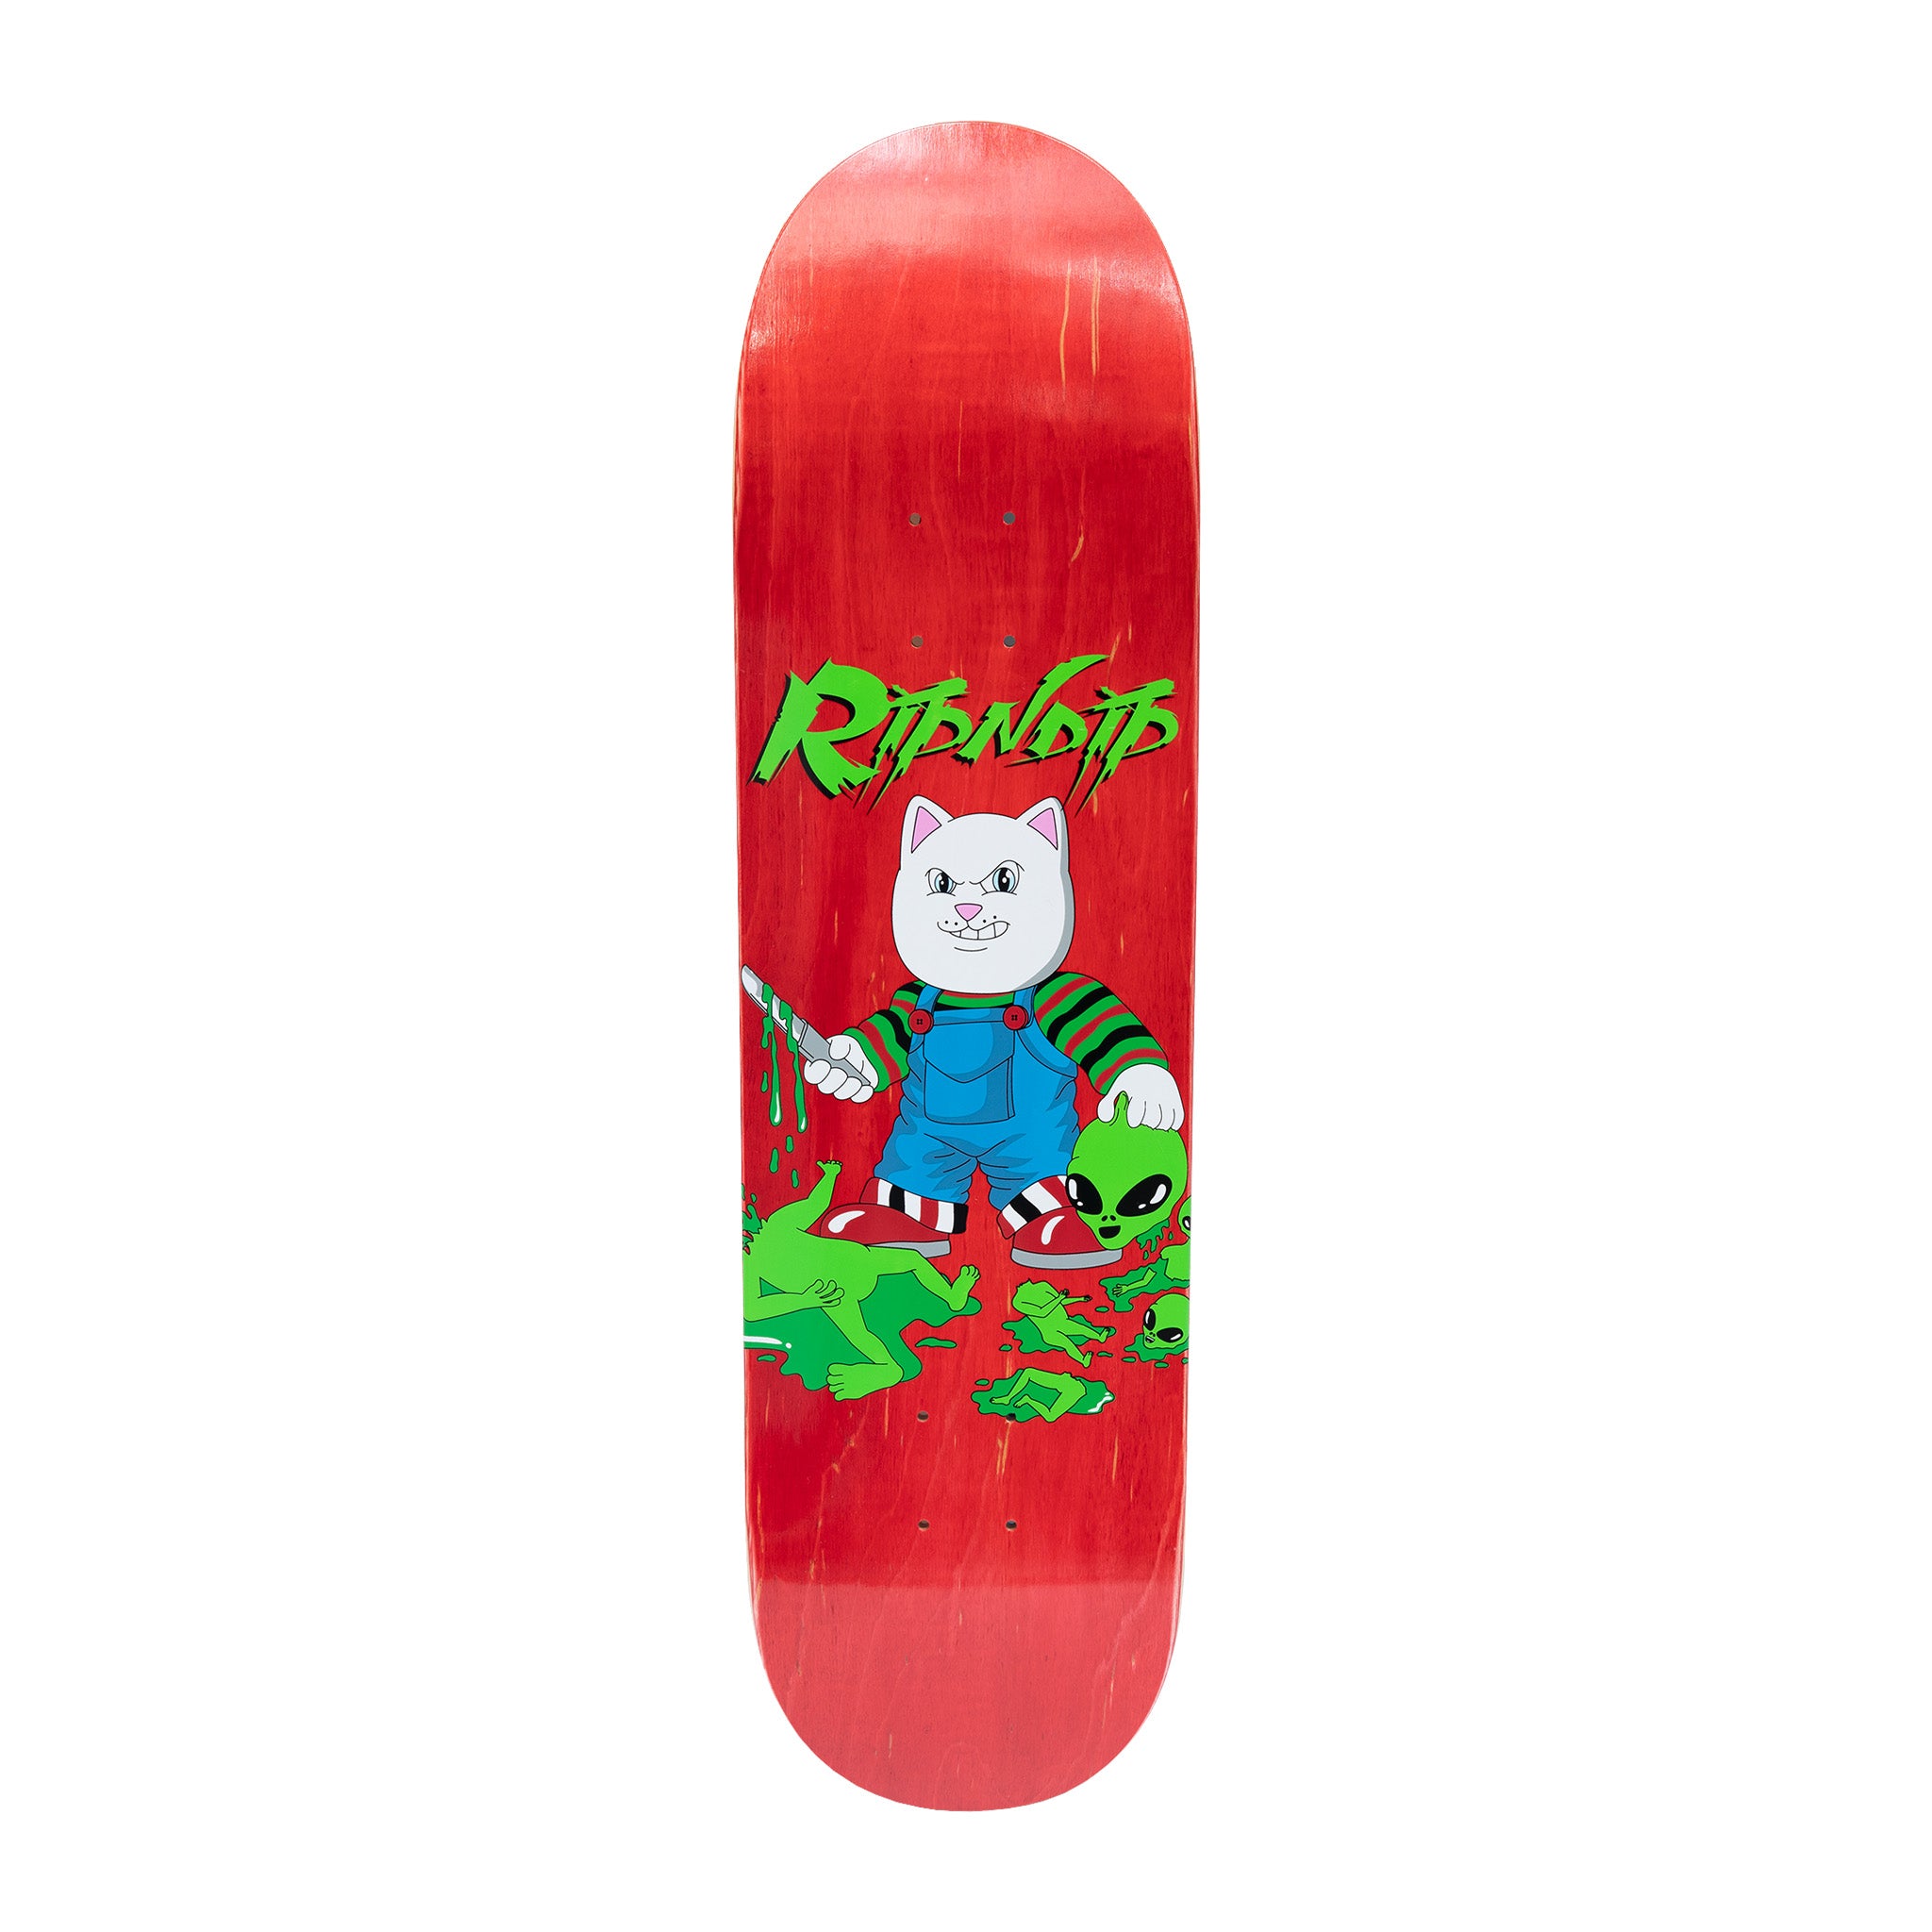 RipNDip Childs Play Board (Red)